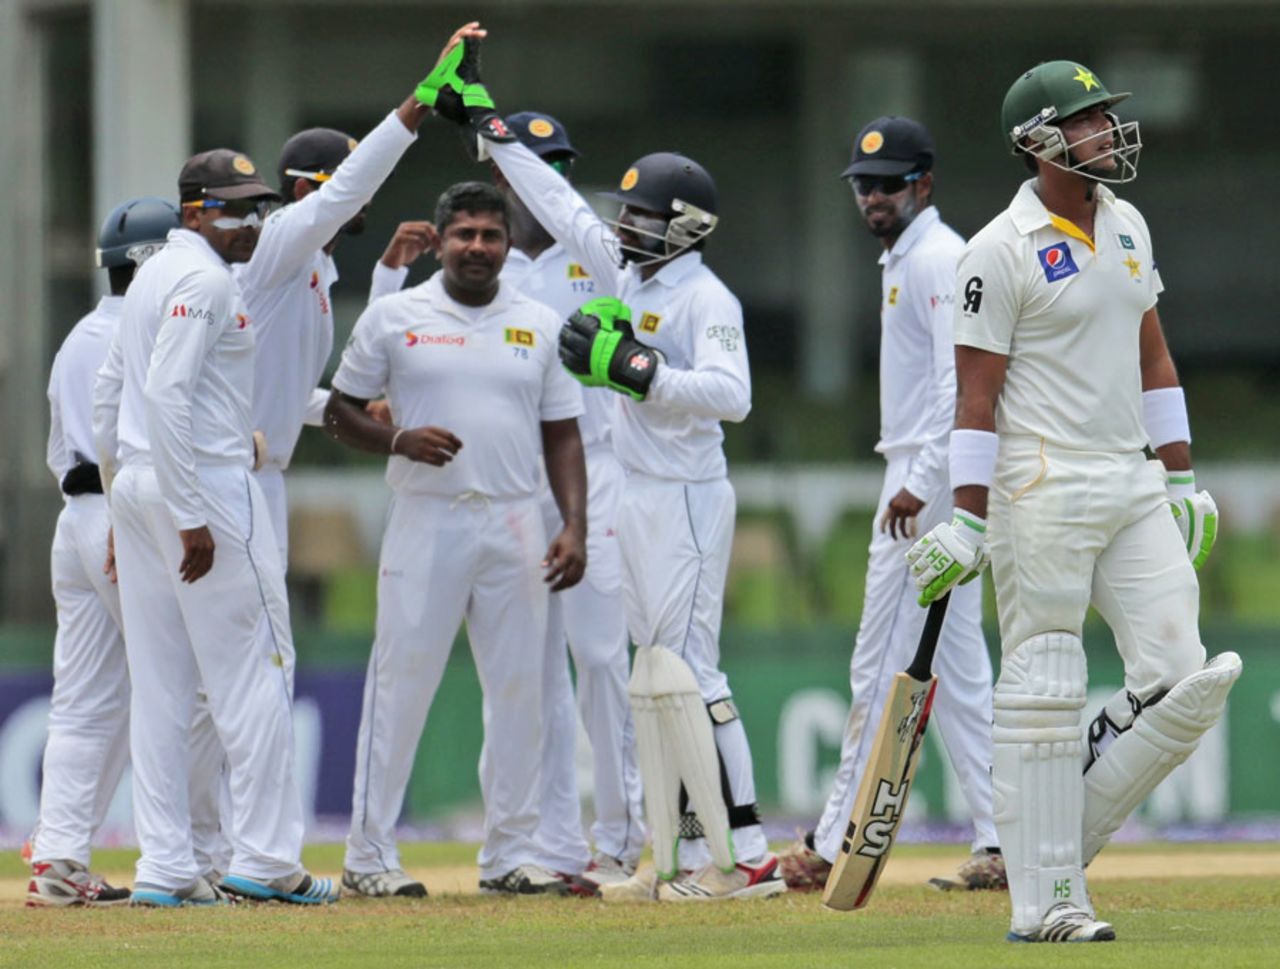 Khurram Manzoor walks off after being dismissed by Rangana Herath, Sri Lanka v Pakistan, 2nd Test, Colombo, 2nd day, August 15, 2014